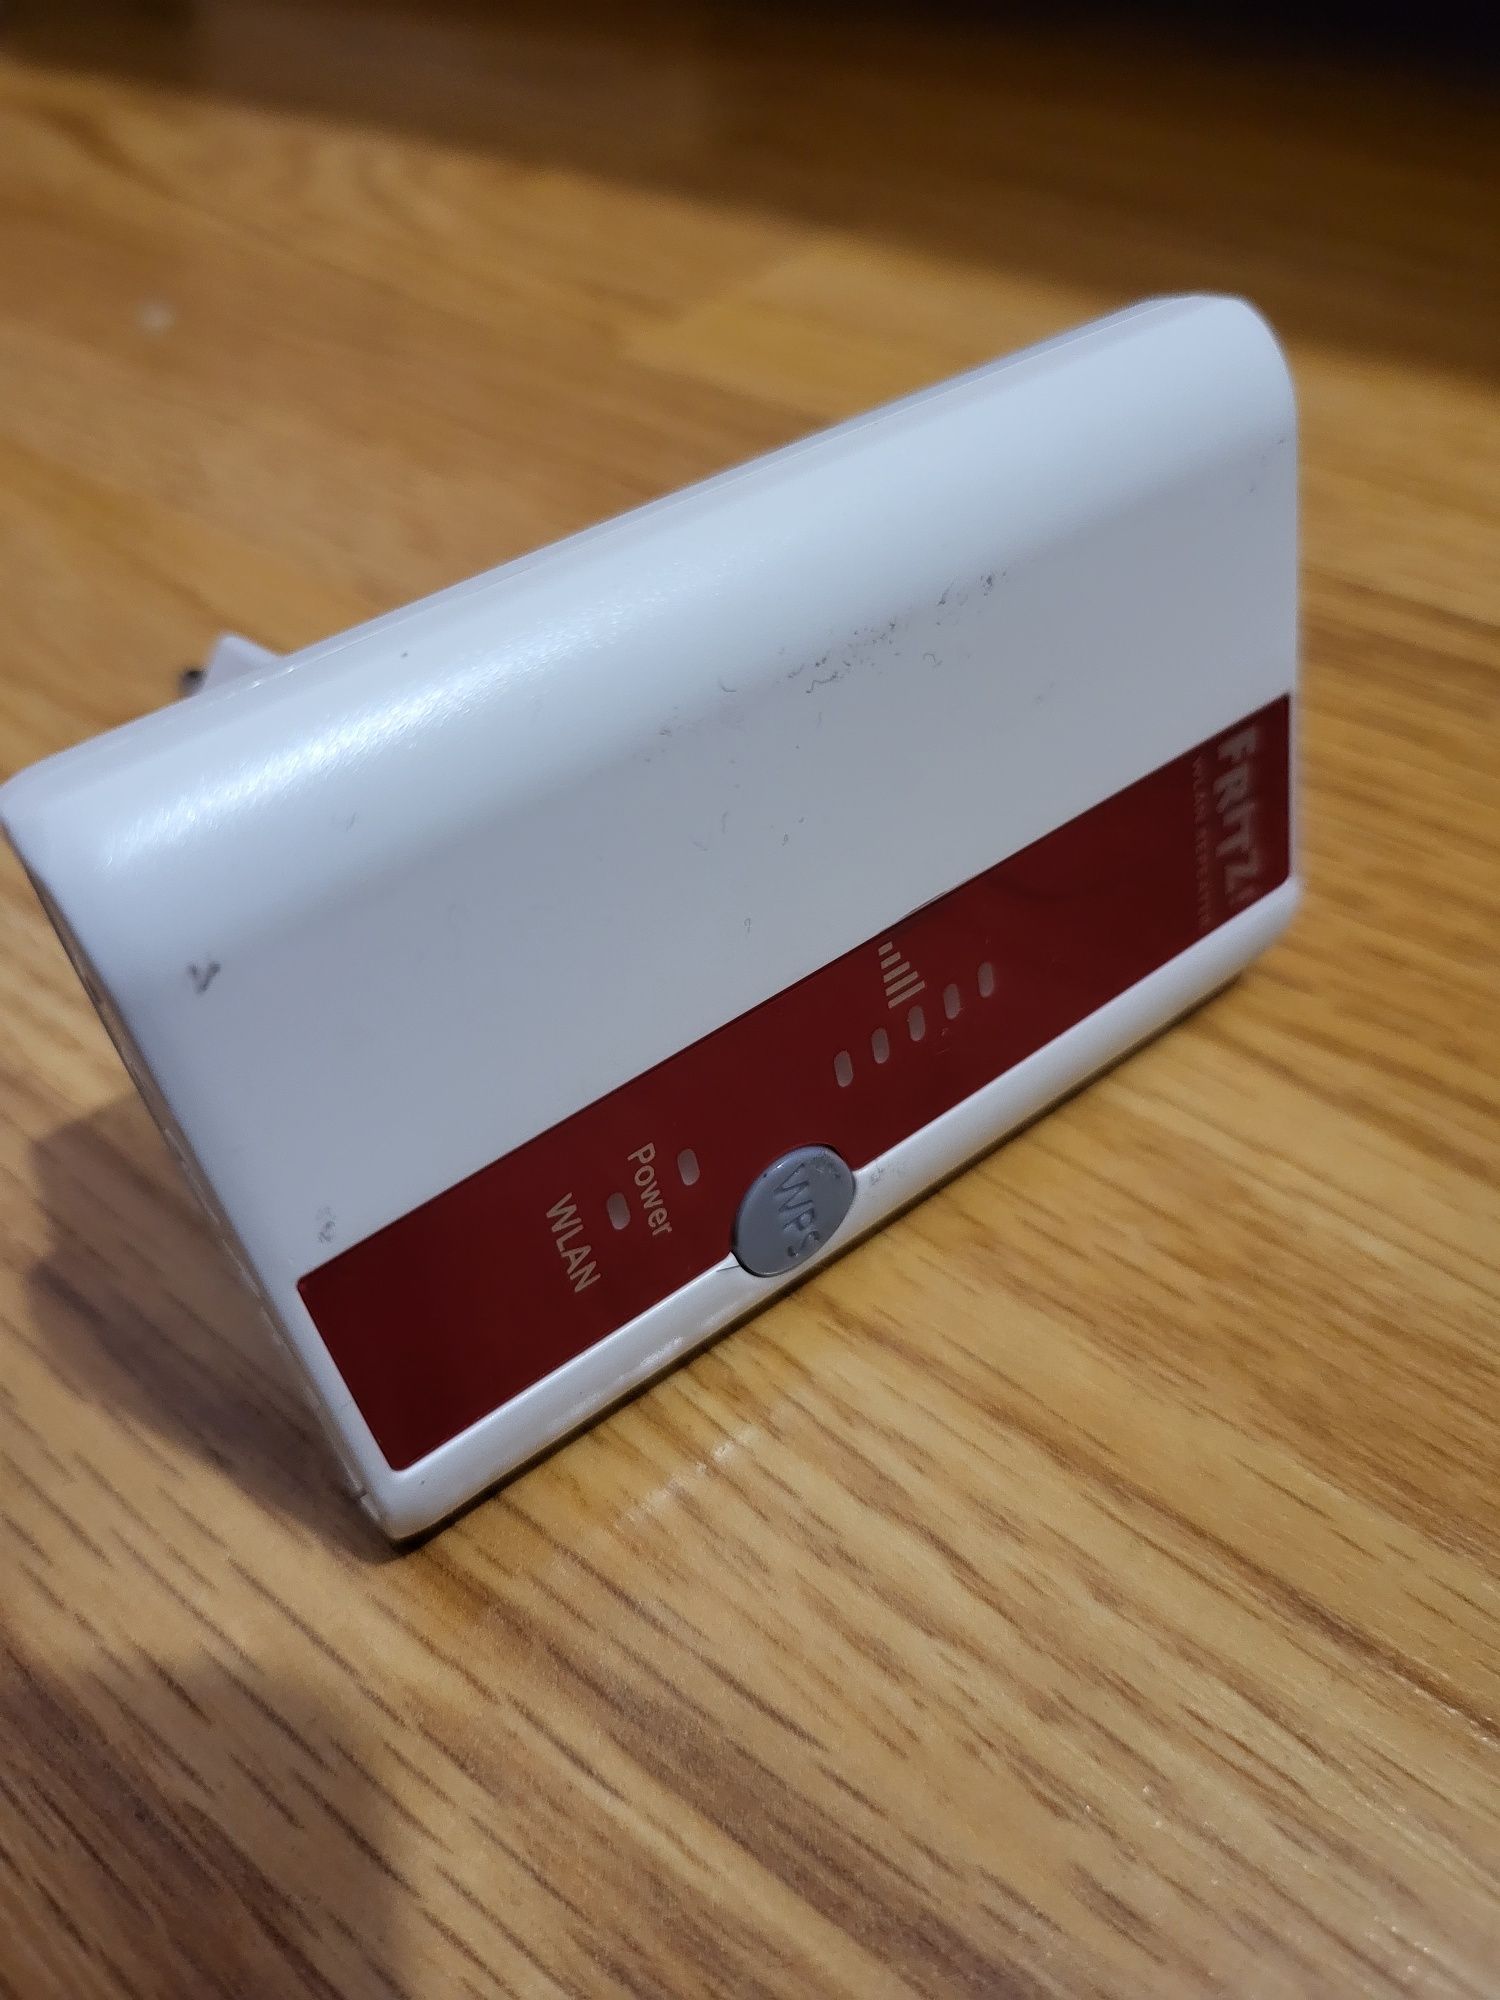 Fritz 310 wlan wifi repeater / extender, extinde semnal wifi